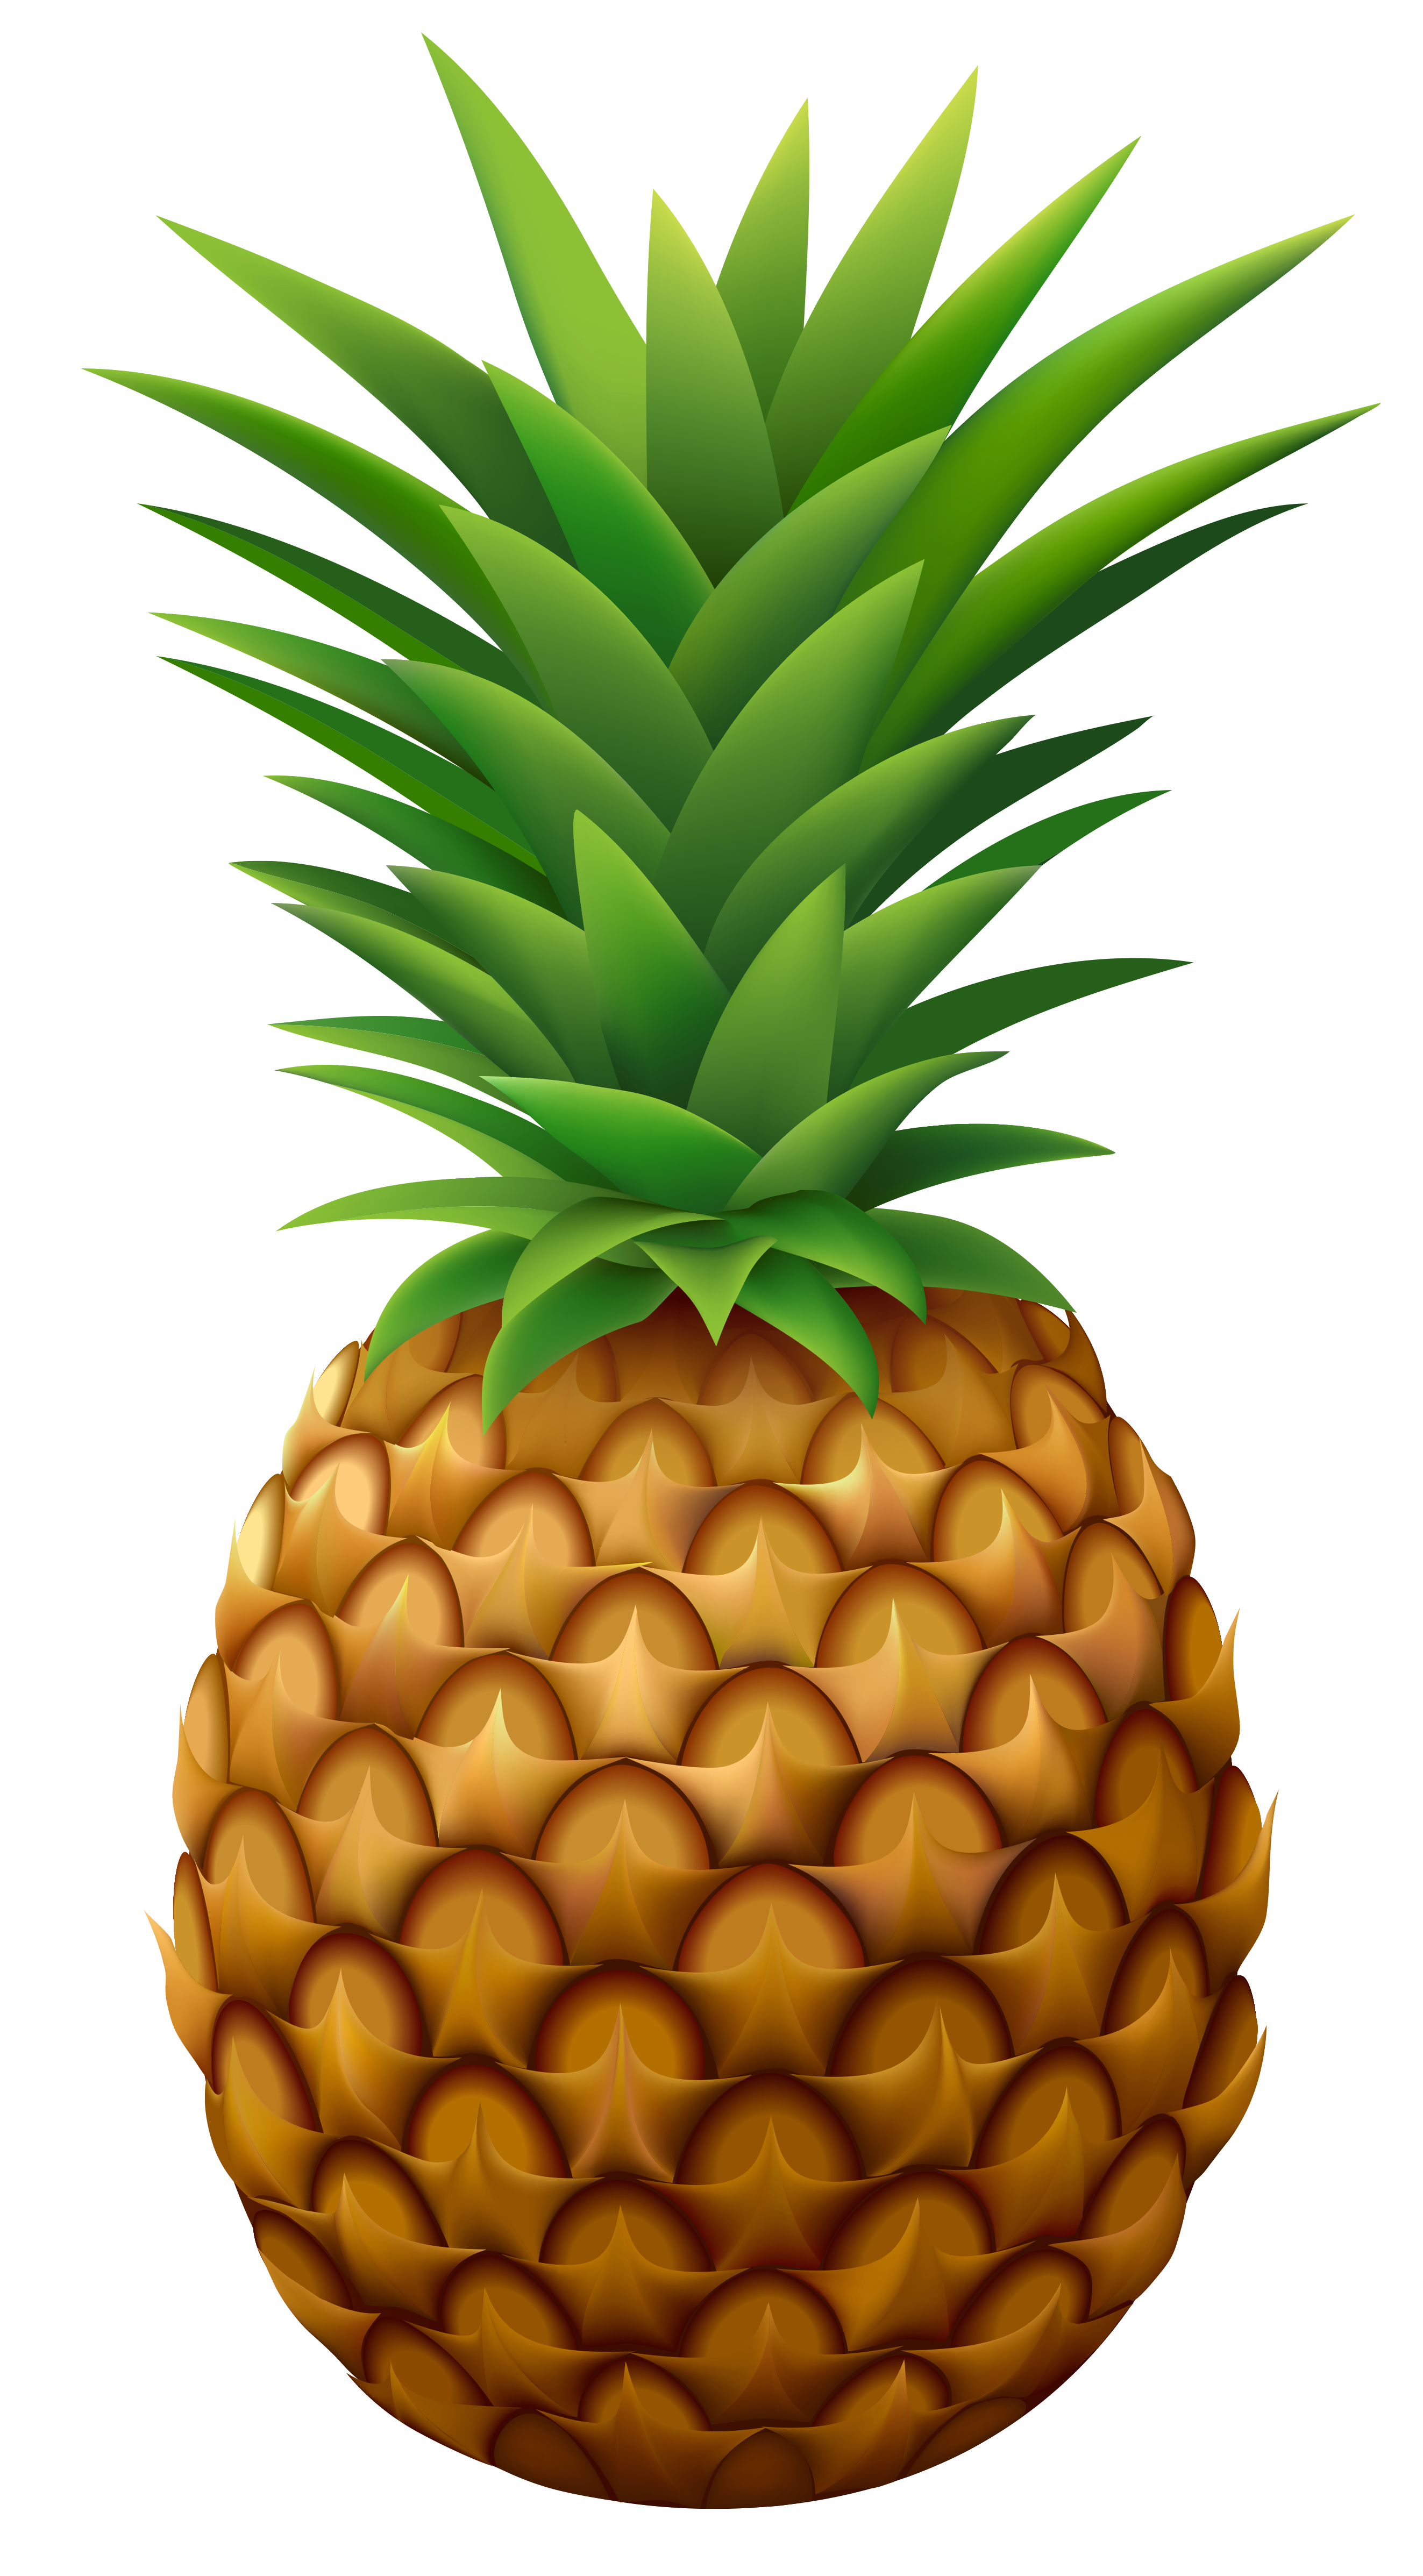 Png vector image gallery. Head clipart pineapple